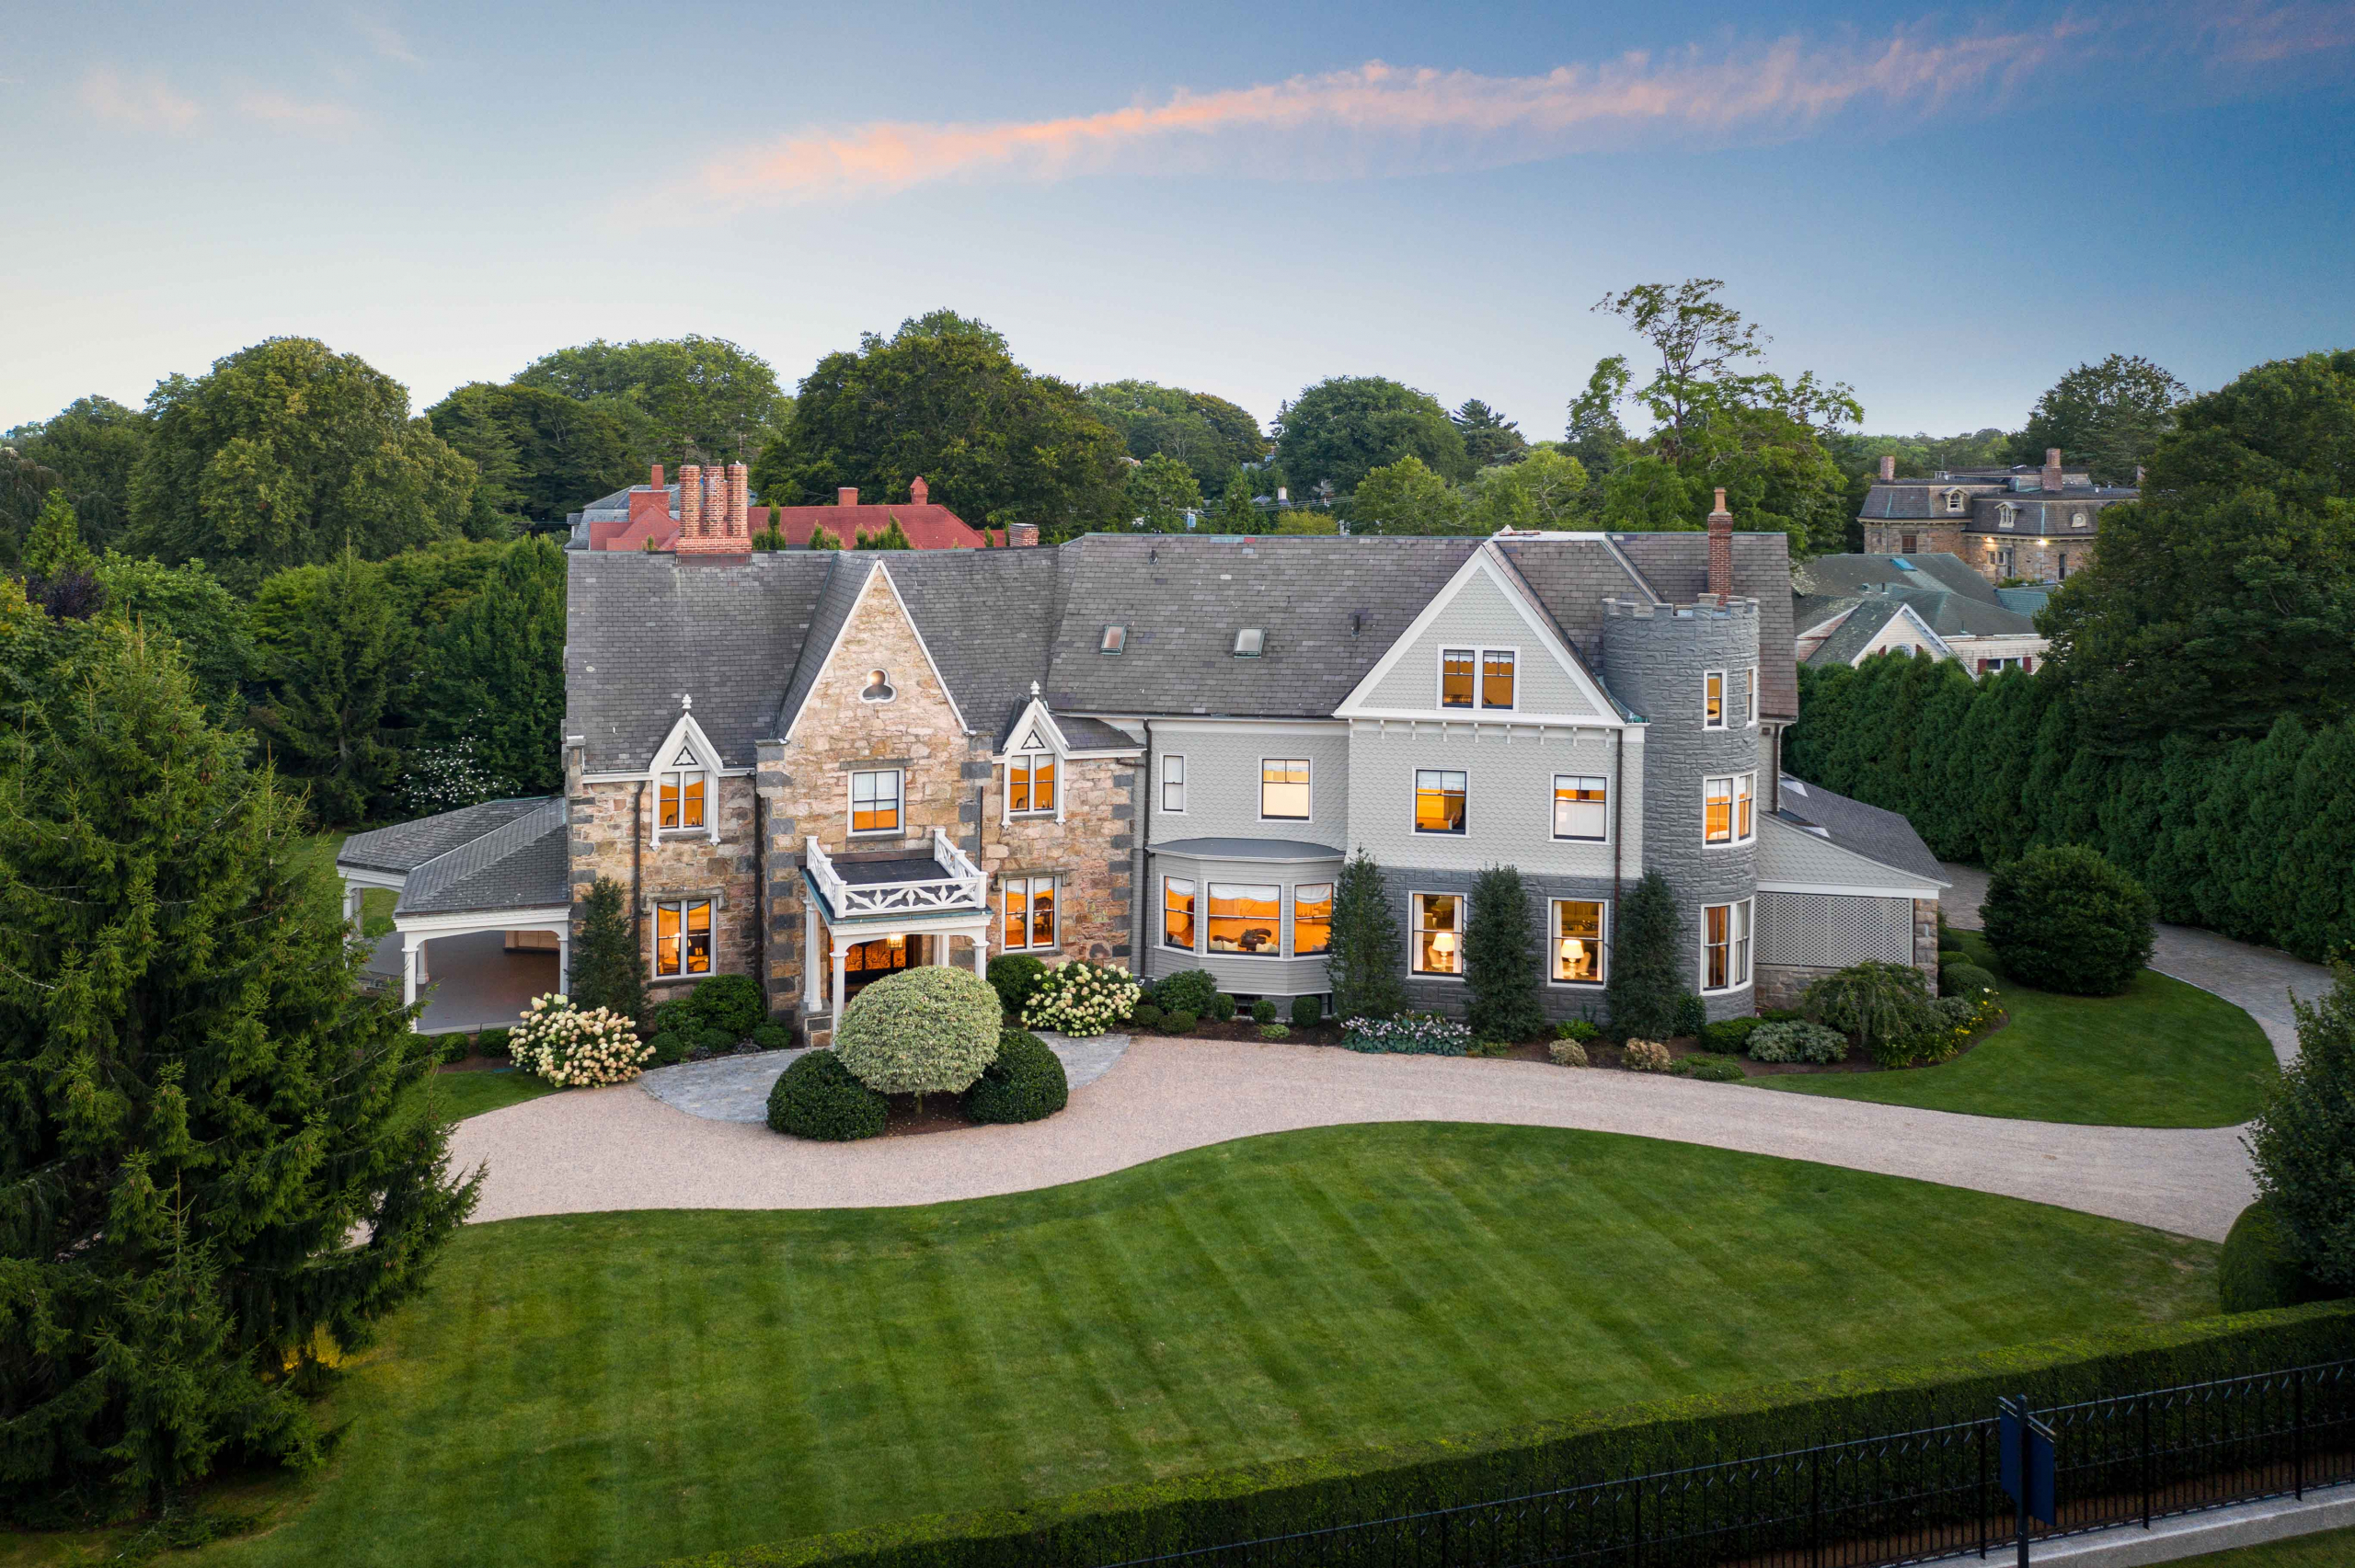 ‘ROCKRY HALL’, NOTABLE BELLEVUE AVENUE MANSION, SELLS FOR $5,200,000